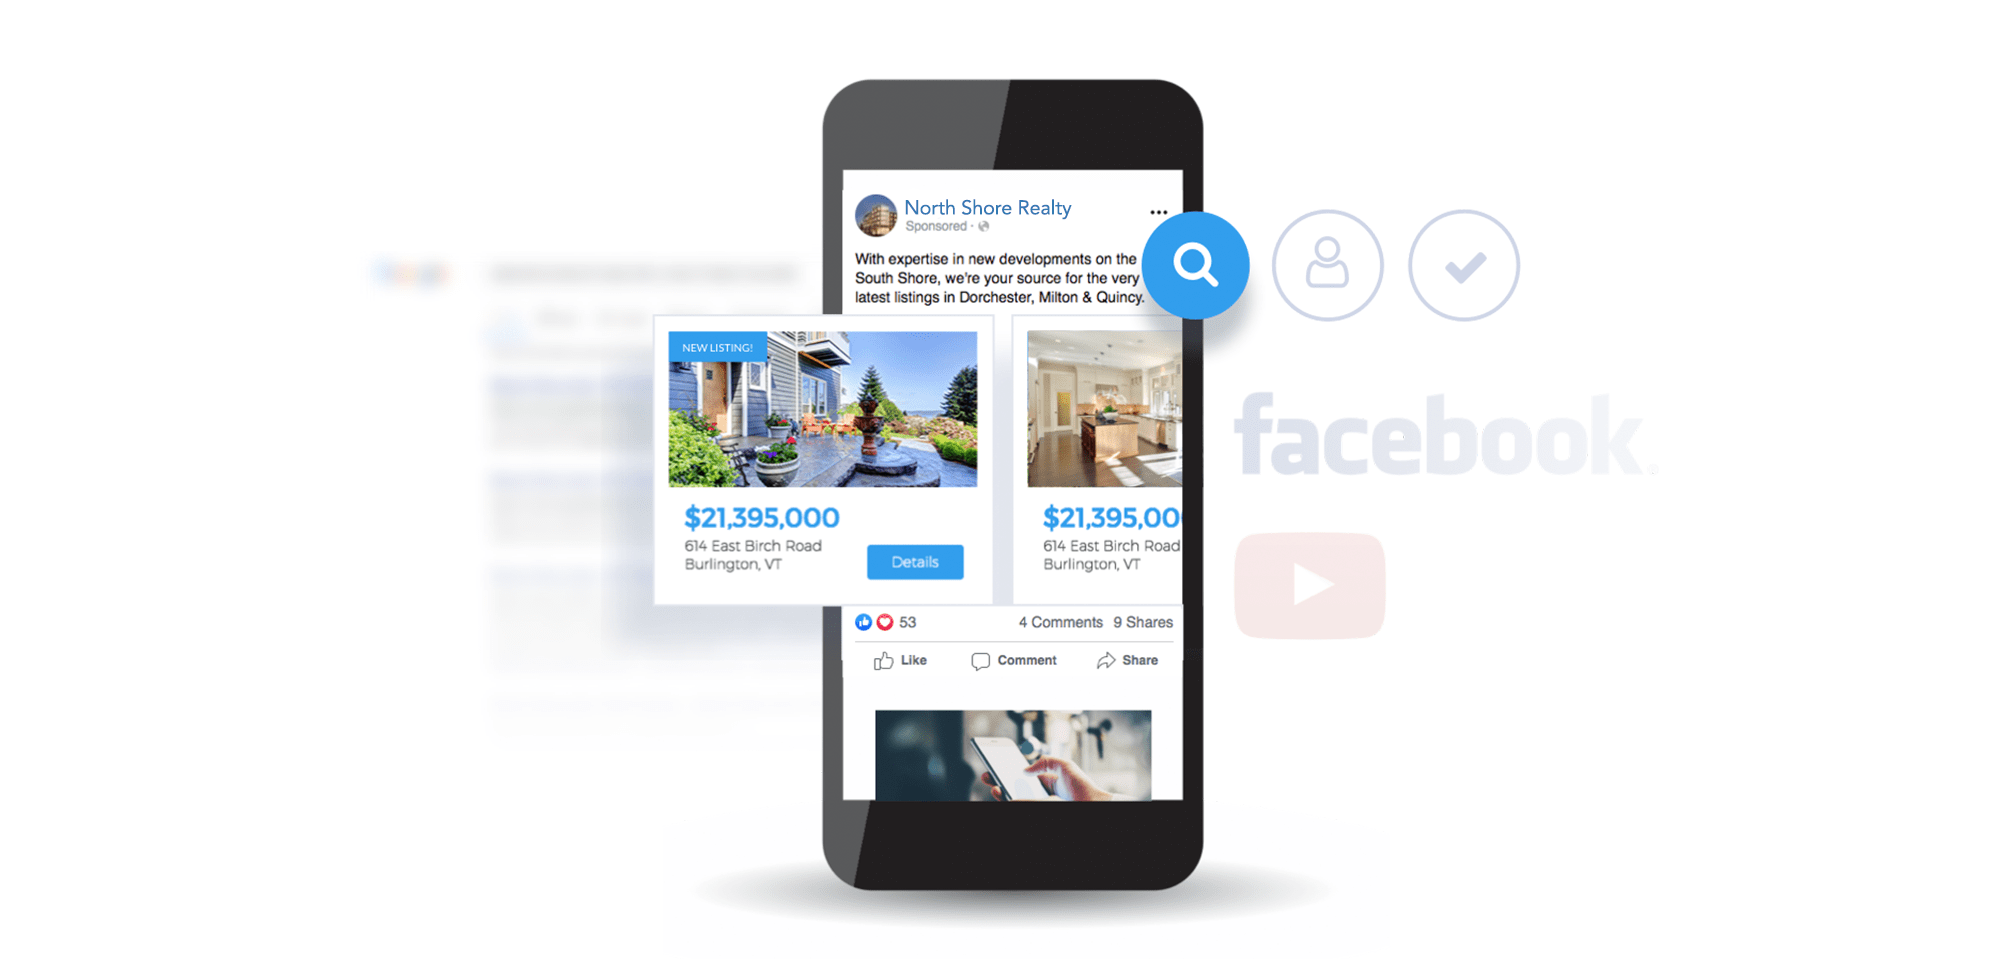 Run Facebook Ads for Real Estate with Union Street Media